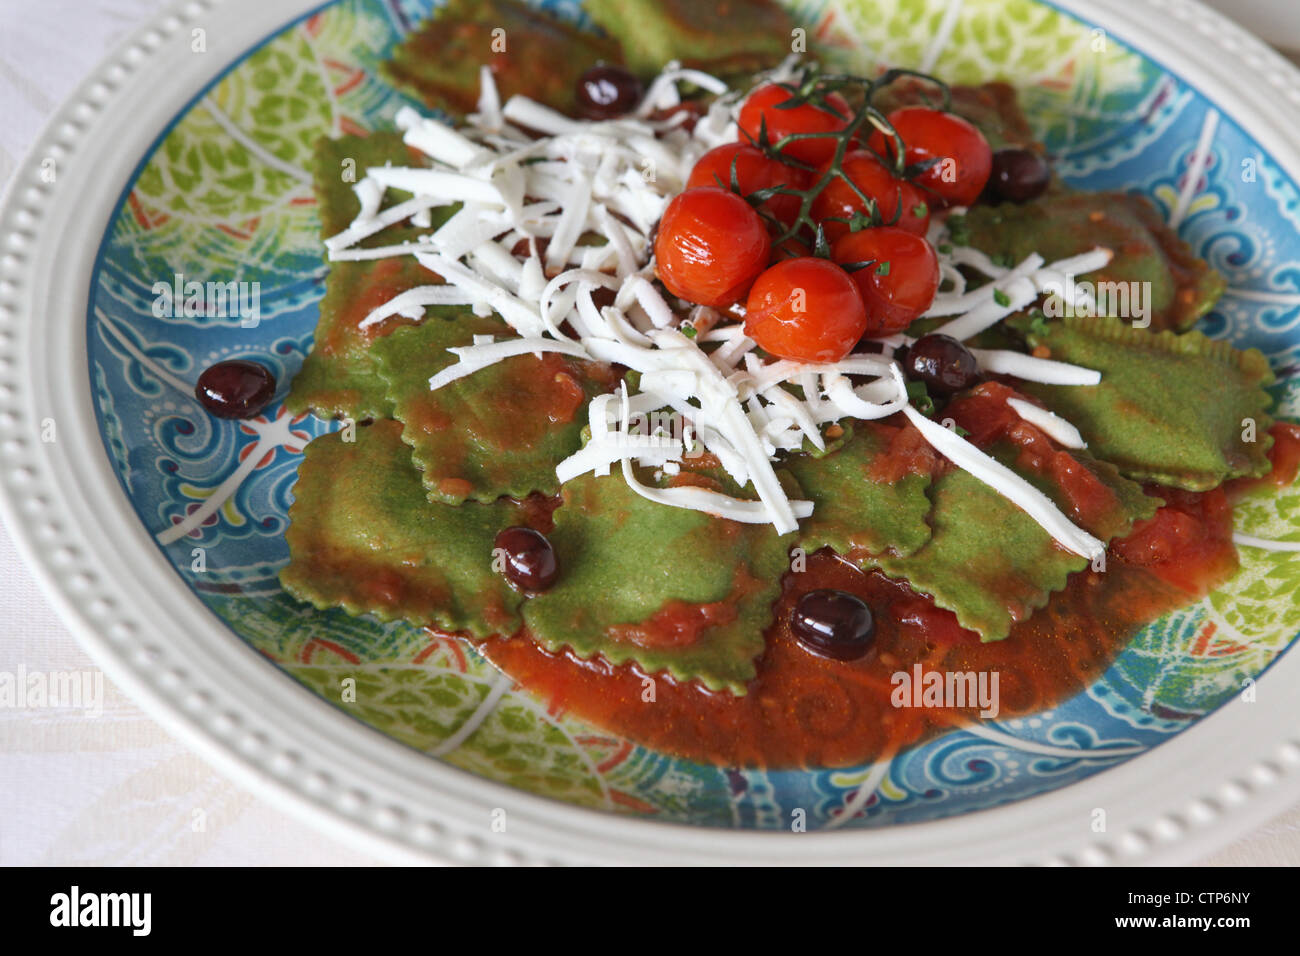 A plate of freshly cooked spinach flavoured ravioli (stuffed pasta) Stock Photo